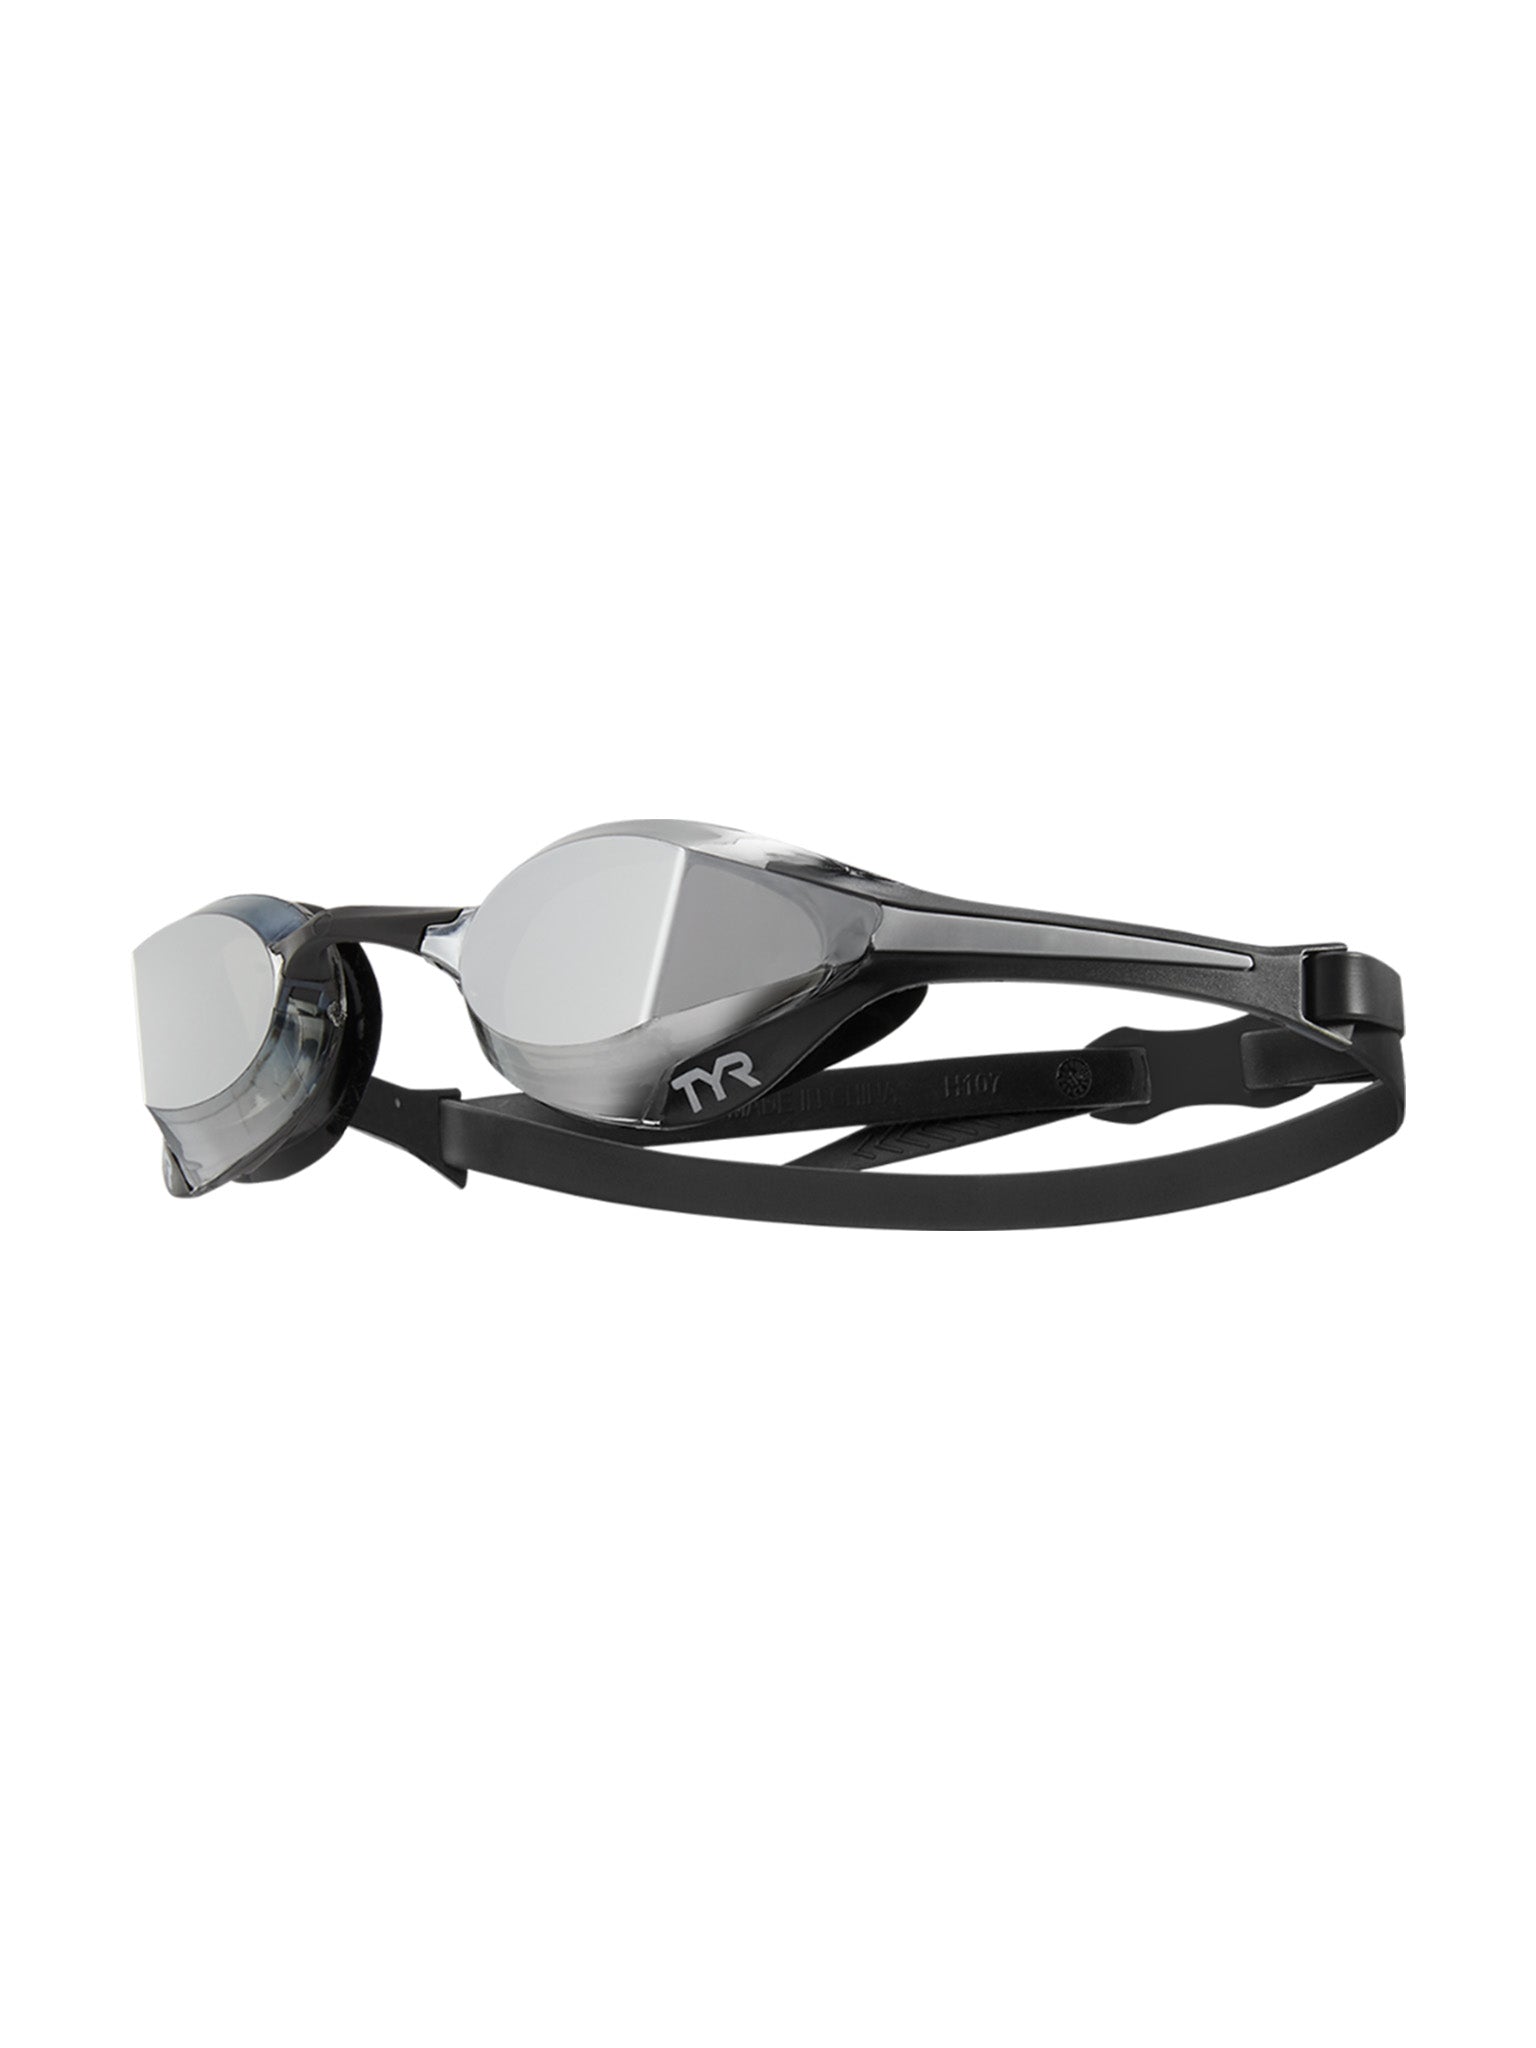 TYR Tracer-X Elite Racing Goggles Mirrored